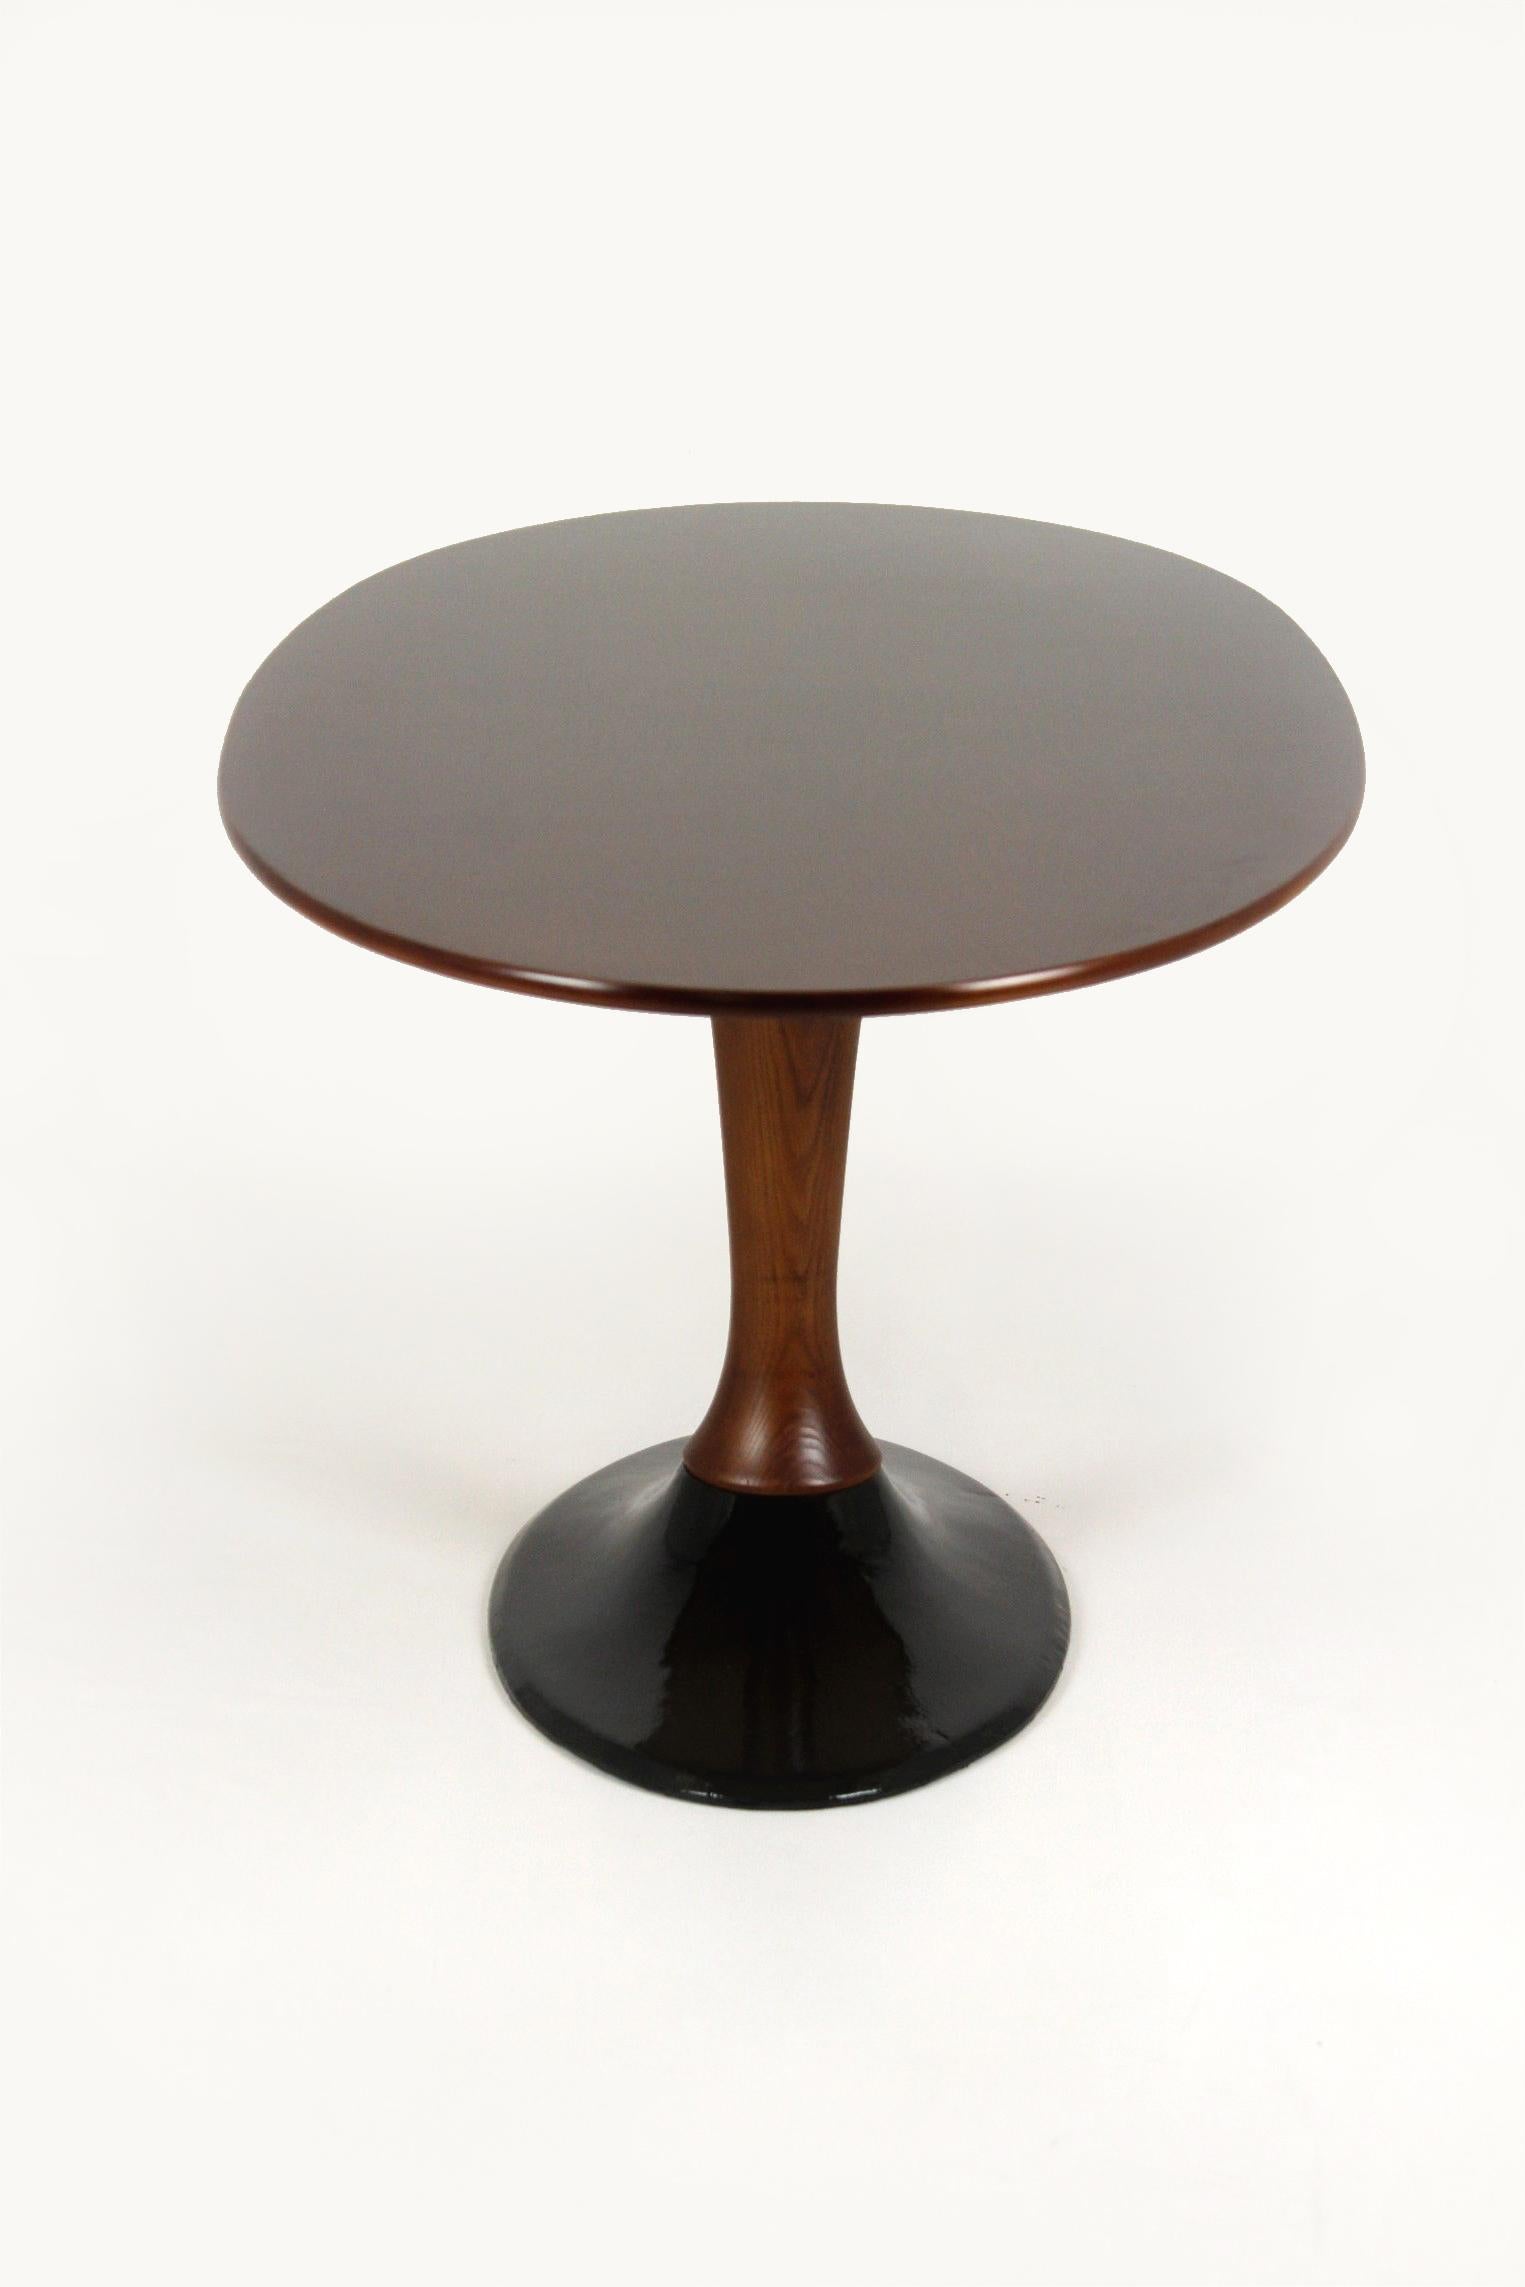 20th Century Restored Mid-Century Modern Oval Ash Coffee Table from Drevotvar, 1960s